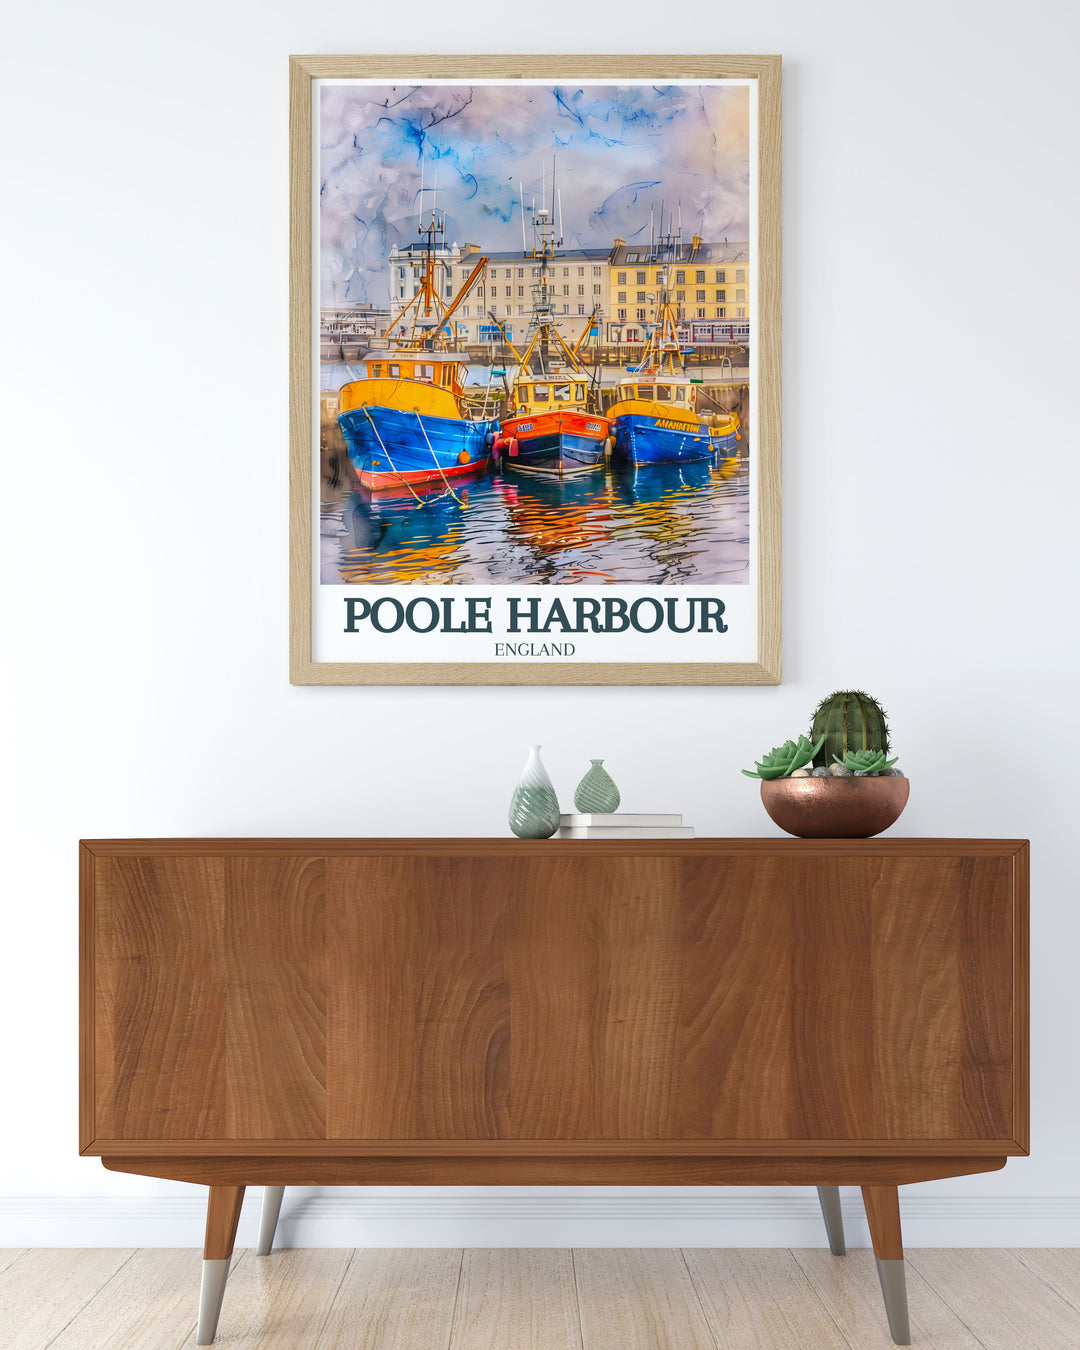 Stunning travel poster of Poole Harbour showcasing the charm of Borough of Poole Holes Bay an exquisite piece of England wall decor ideal for birthdays anniversaries or special occasions